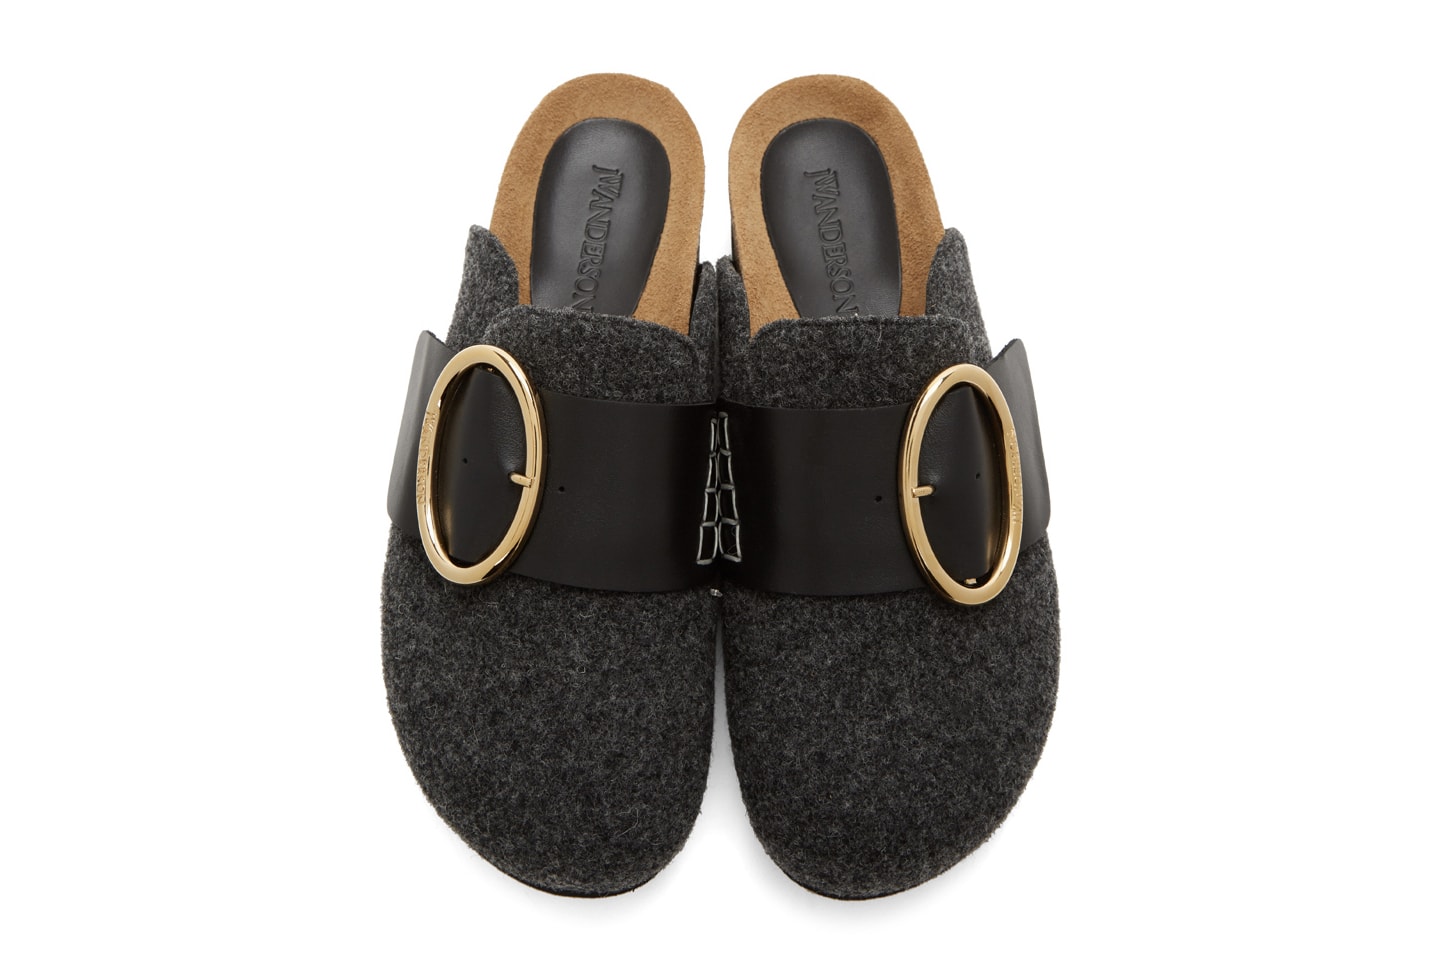 JW Anderson Felt Buckle Loafers Slip-On Shoes Pink Grey White Logo Gold Metal Hardware Fall Autumn Footwear Shoes